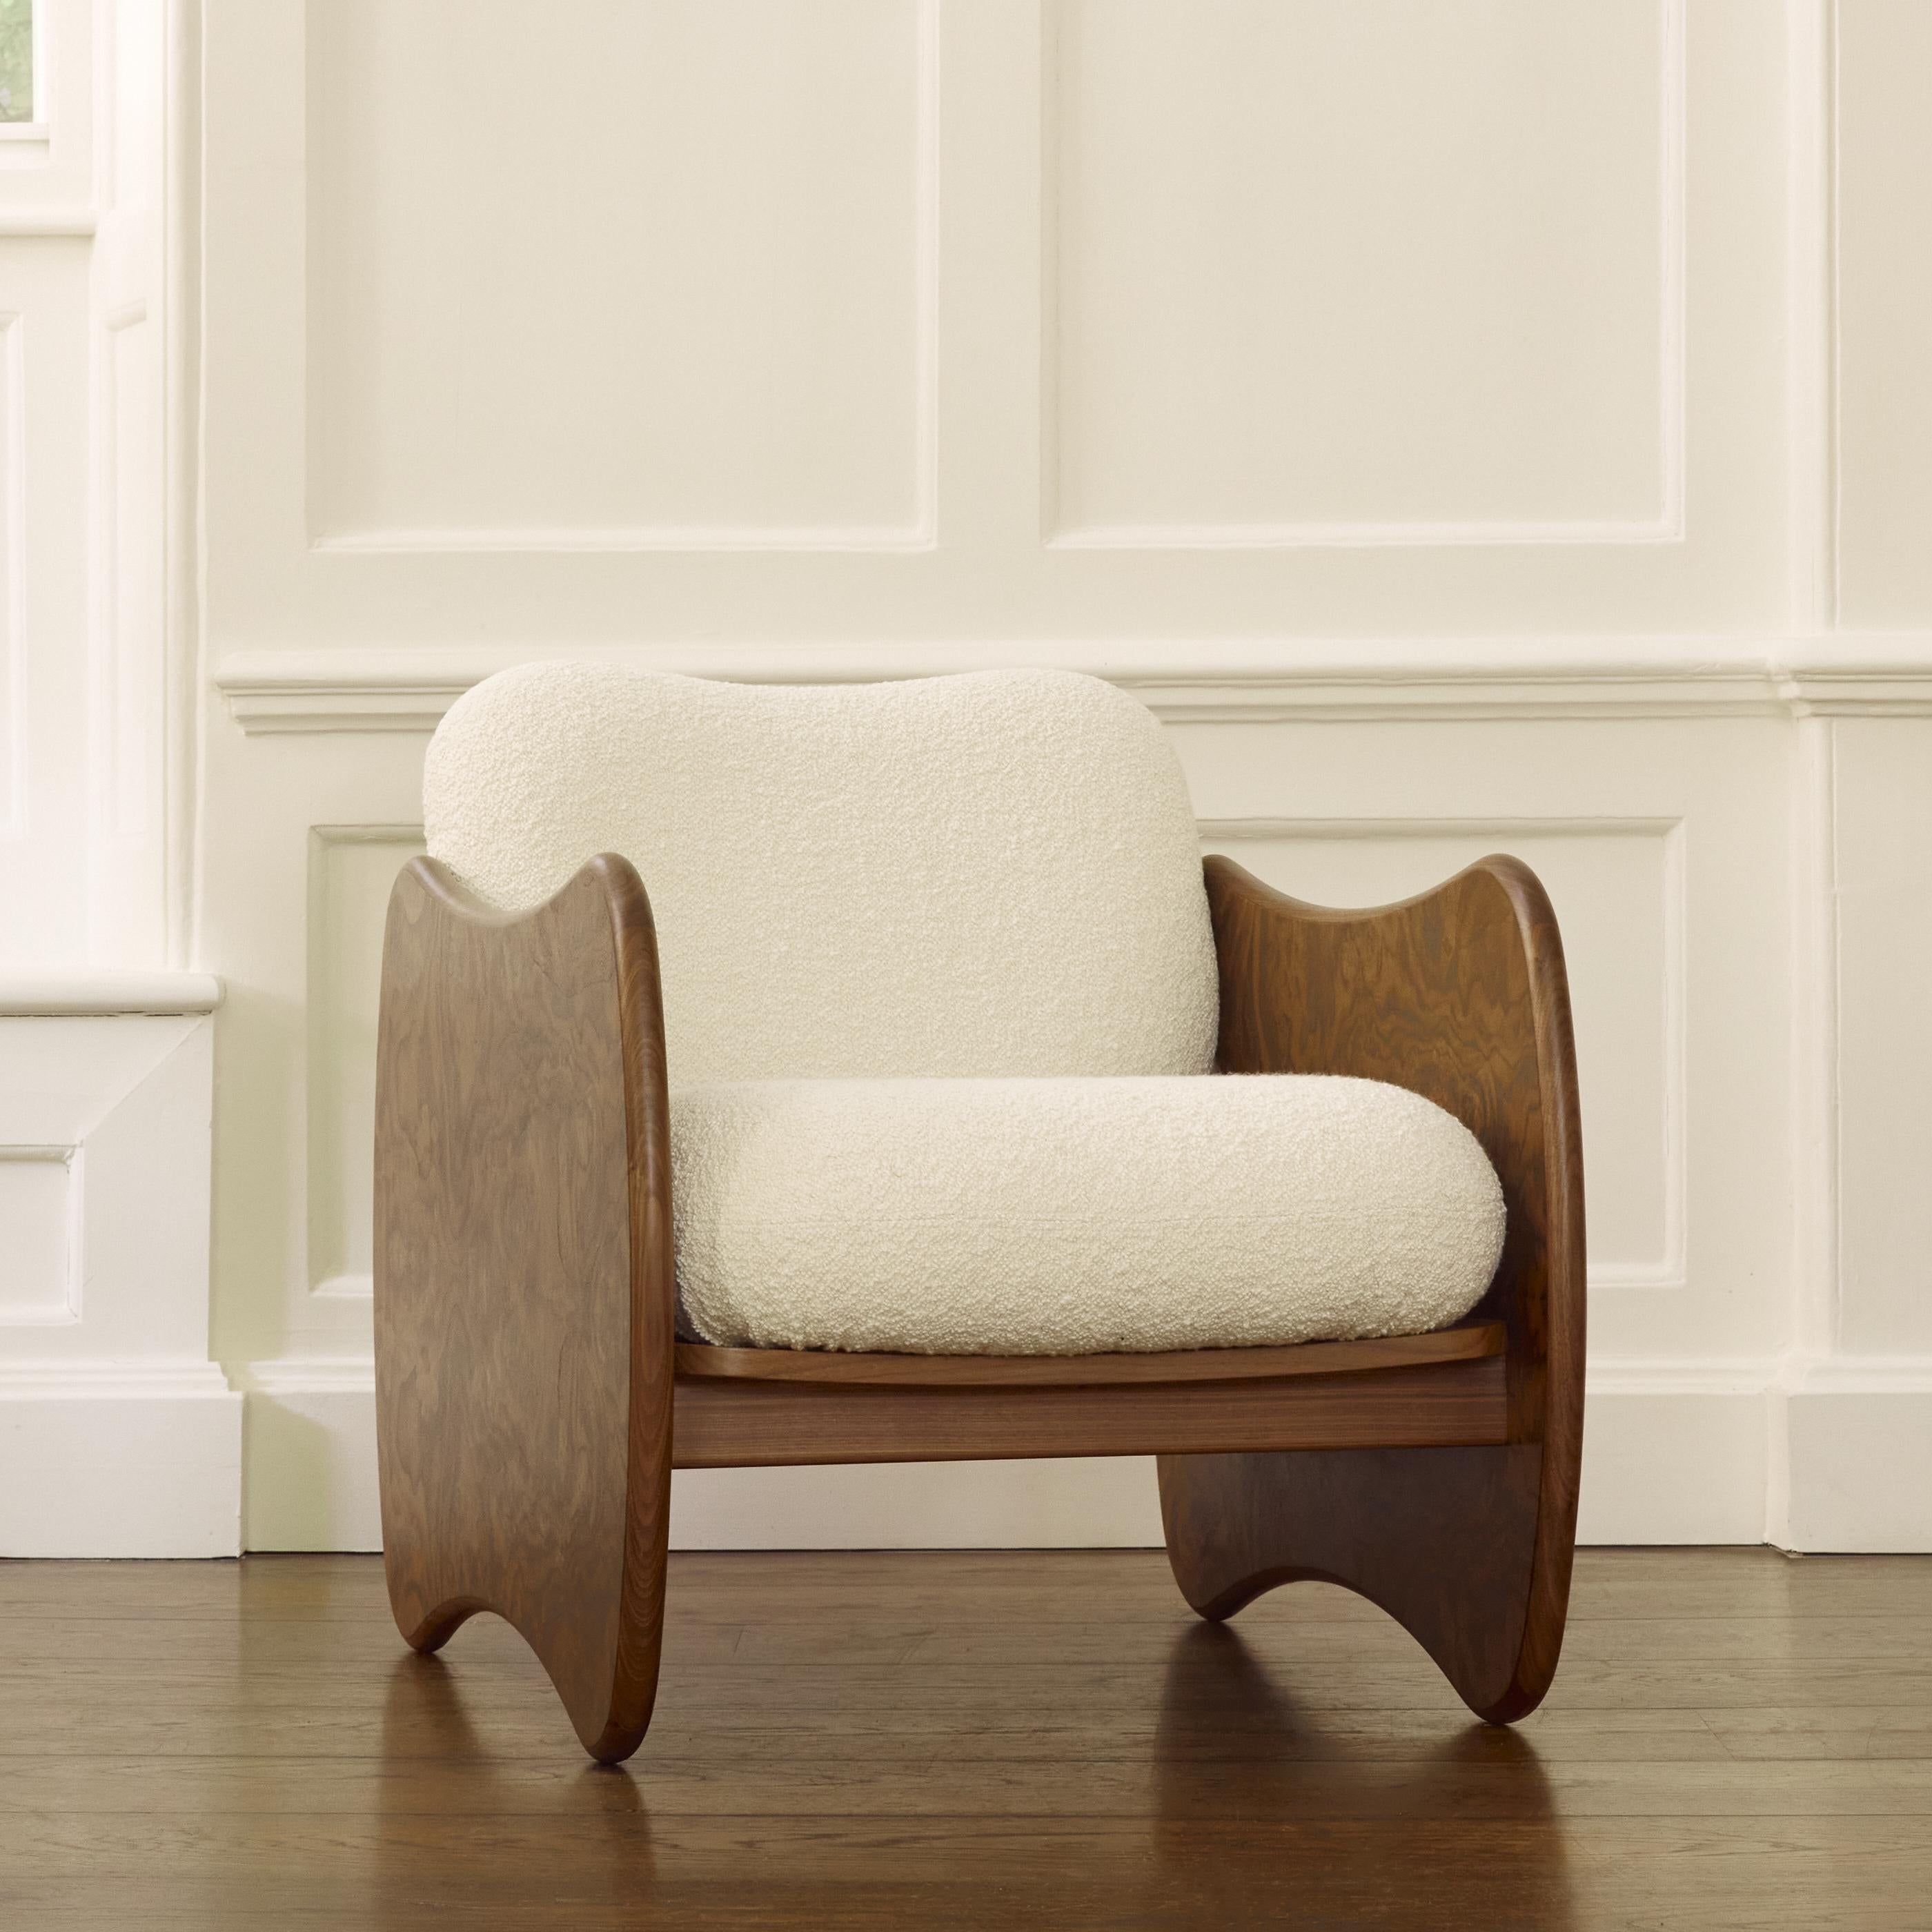 The swoop on our Rhino Chair arm rest is reminiscent of the elegant curve of its parent creature’s back. The frame is wrought from burl walnut veneer, with solid walnut rails for a minimalist and sleek rear. The thick seat pads offer plush comfort,